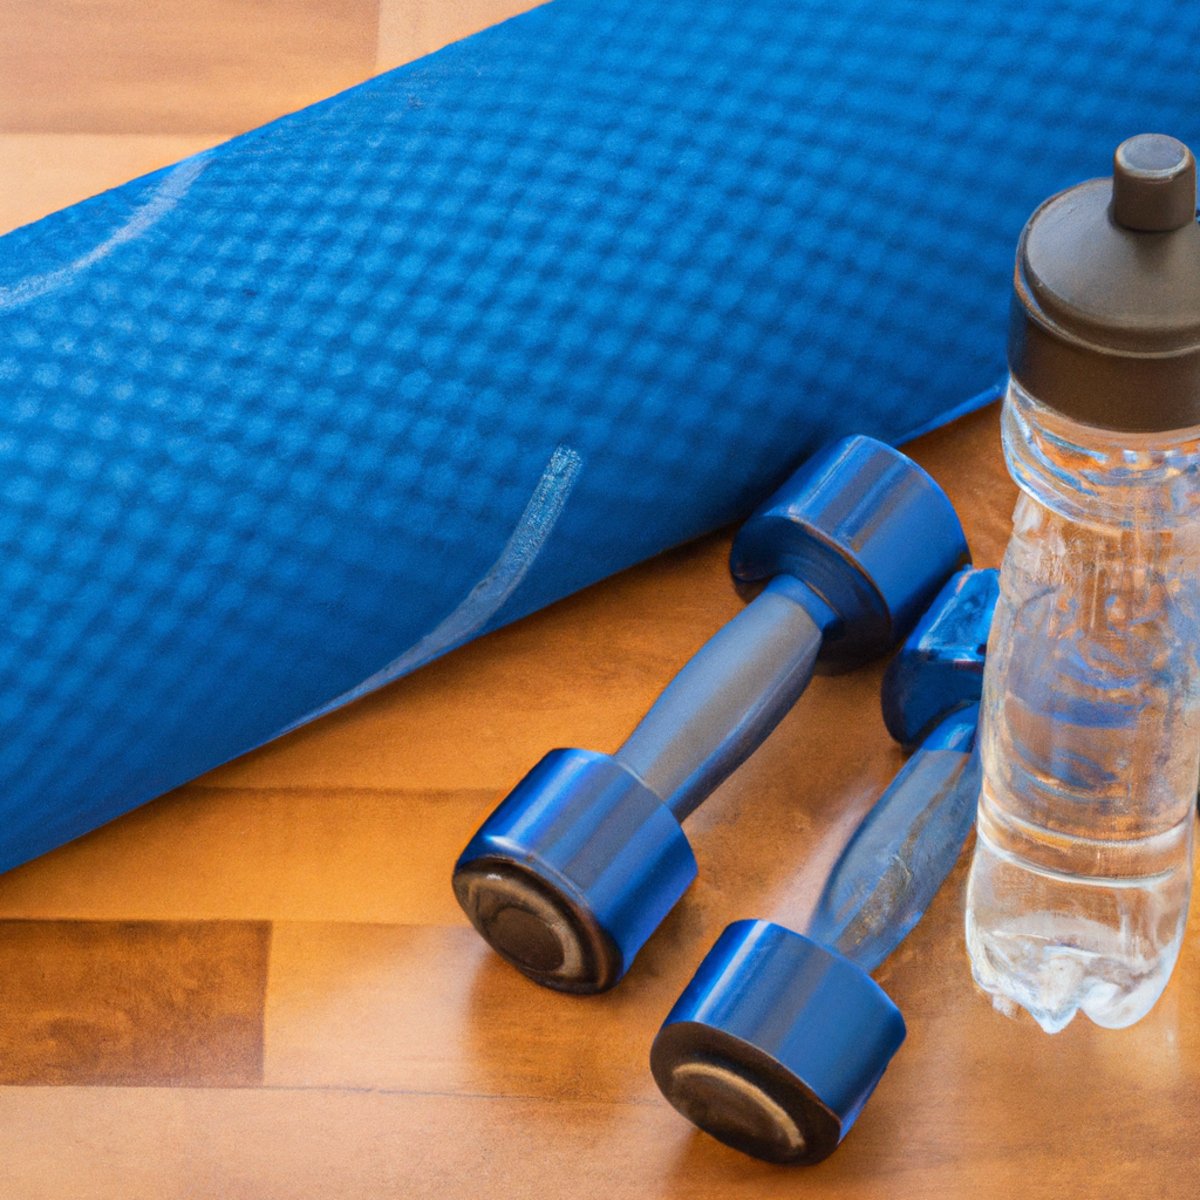 The photo depicts a set of dumbbells, a yoga mat, and a water bottle arranged neatly on a hardwood floor. The dumbbells are of varying weights and have a sleek, metallic finish. The yoga mat is a vibrant shade of blue and has a textured surface for added grip. The water bottle is transparent and filled with clear, refreshing water. The lighting in the photo is bright and natural, casting a warm glow on the objects. The composition of the photo suggests a sense of order and discipline, encouraging readers to take their fitness routines seriously.